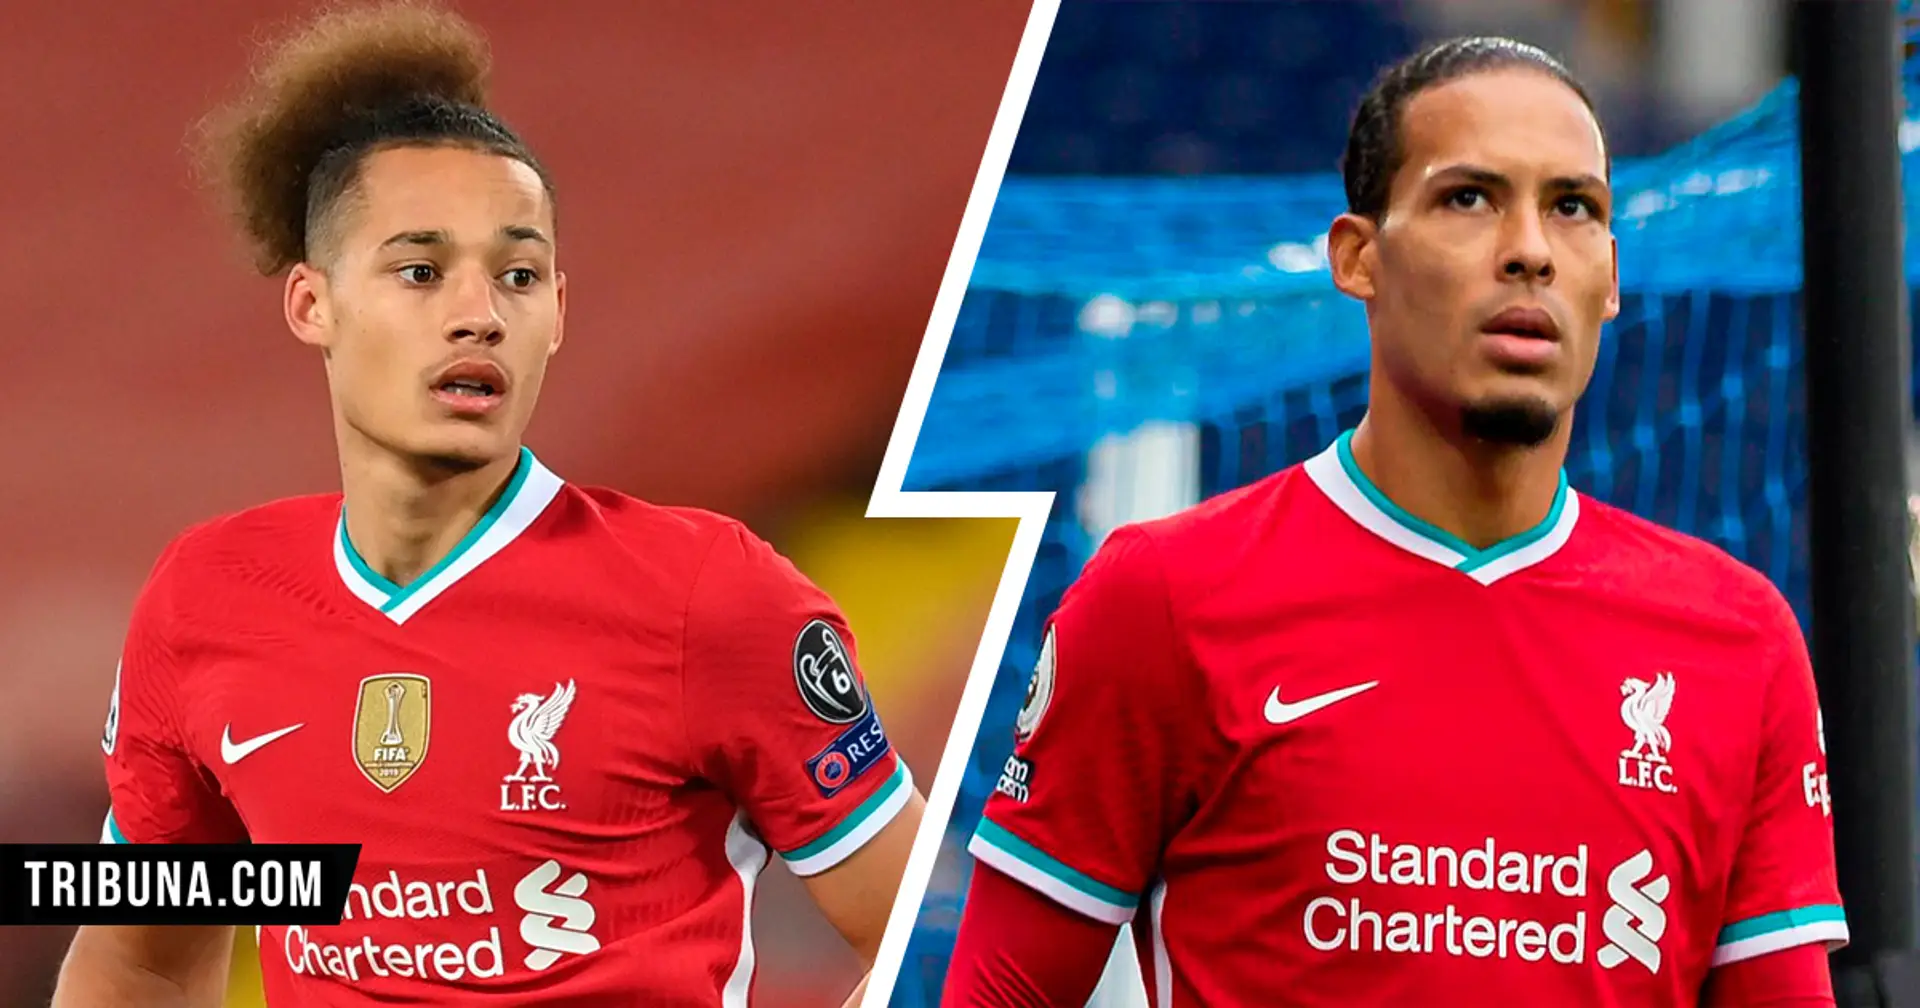 Rhys Williams' former boss: 'He looks like next Van Dijk and he’s performing like it as well'